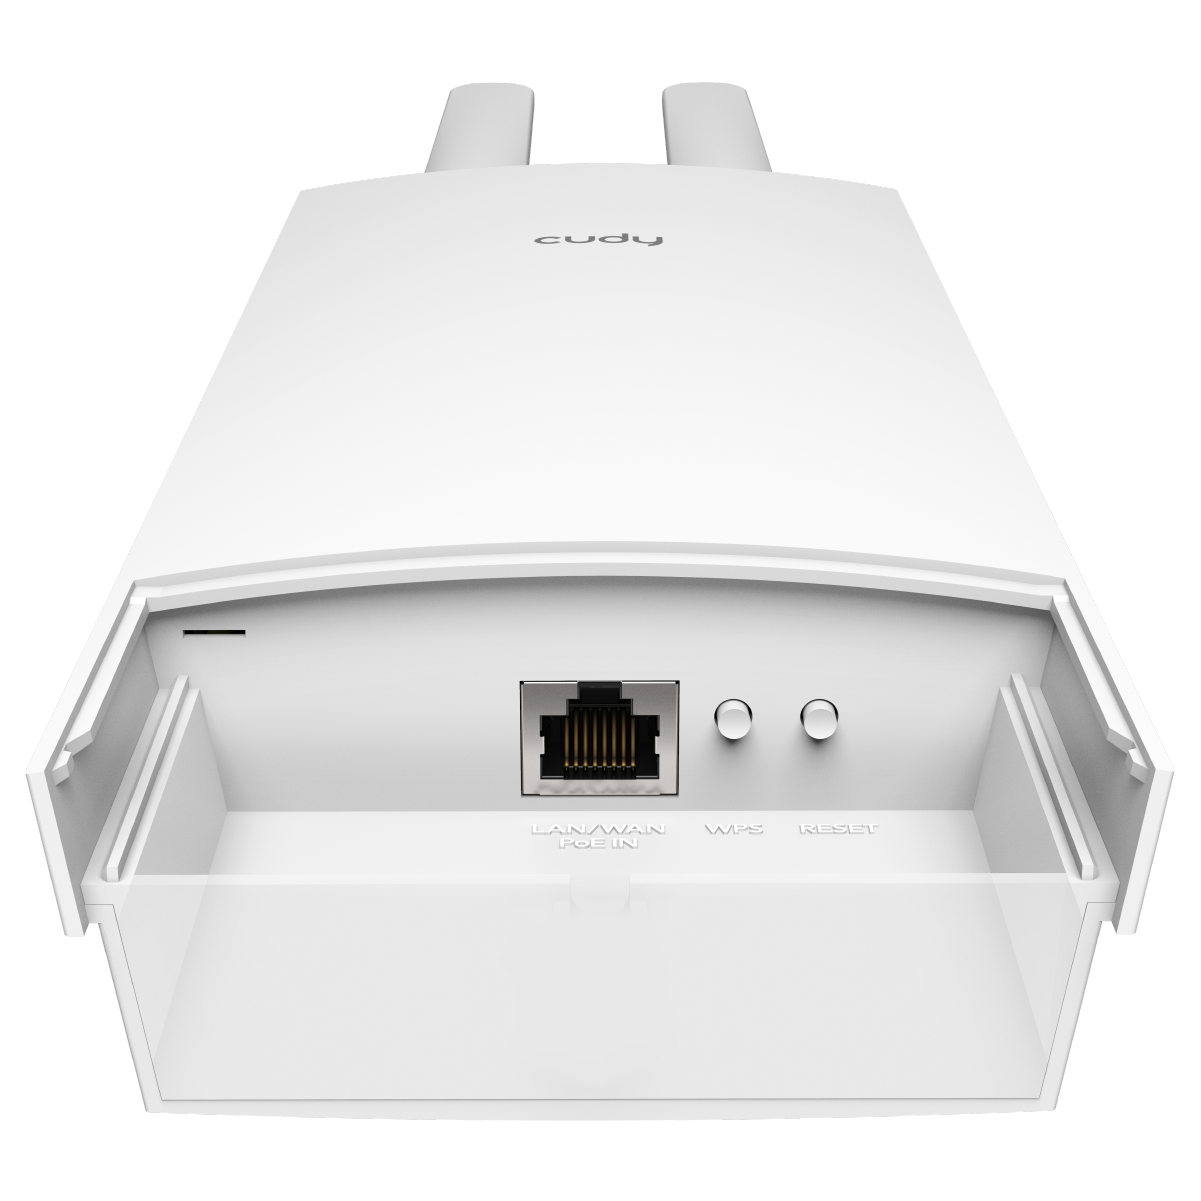 Outdoor/Indoor AC1200 Wi-Fi Access Point, AP1300 Outdoor 1.0